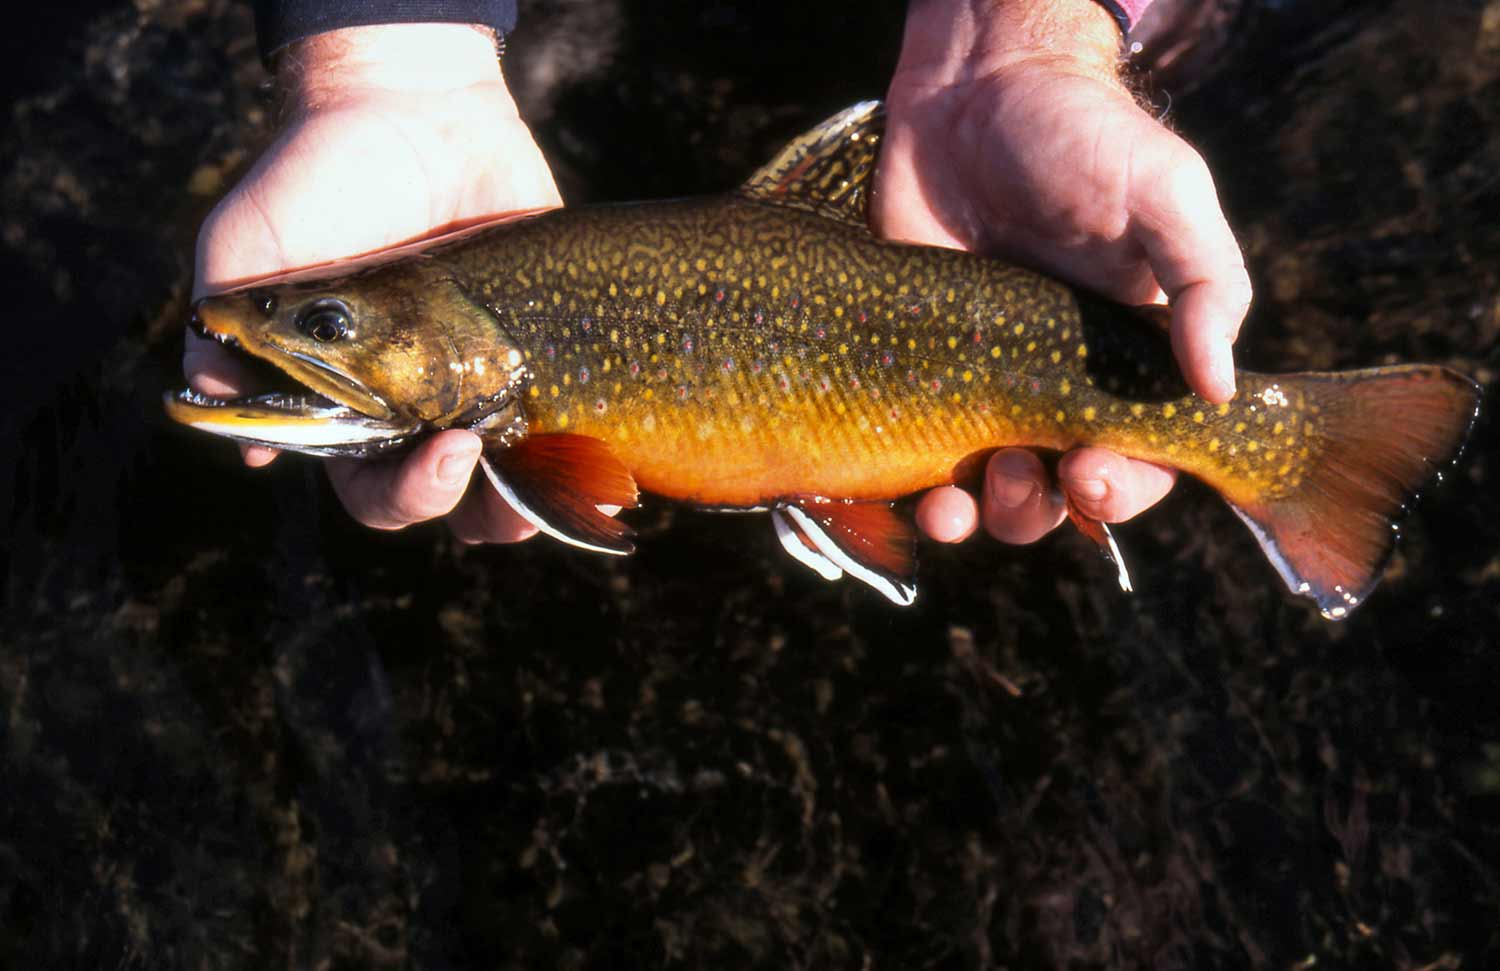 In the eastern United States, book trout are usually found in small mountain streams.